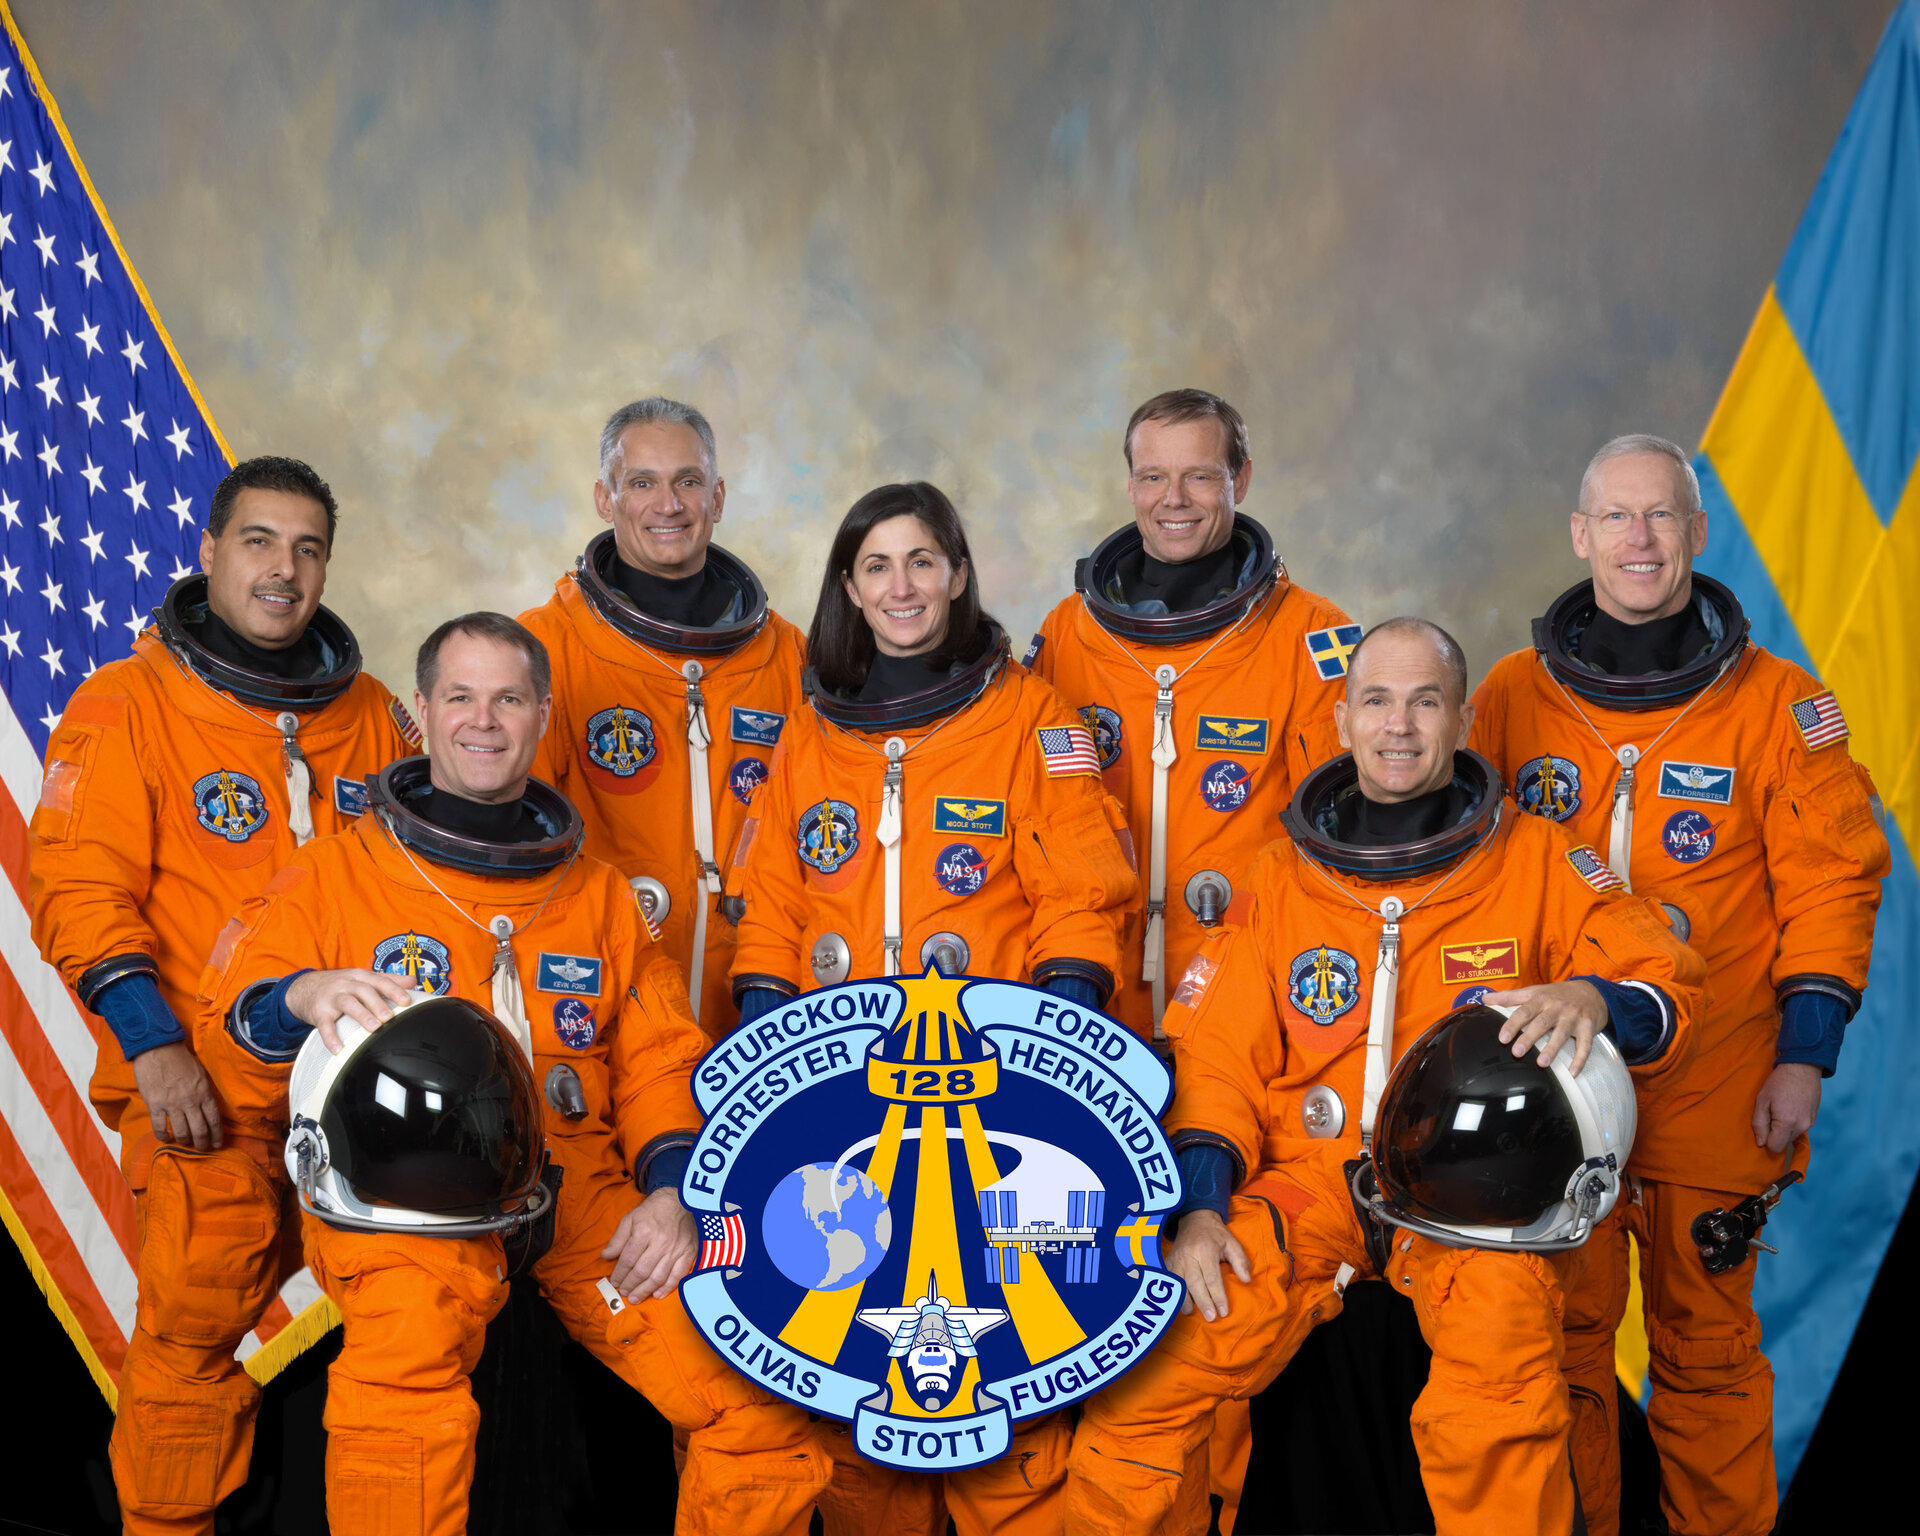 STS-128 crew arrived at the ISS early this morning